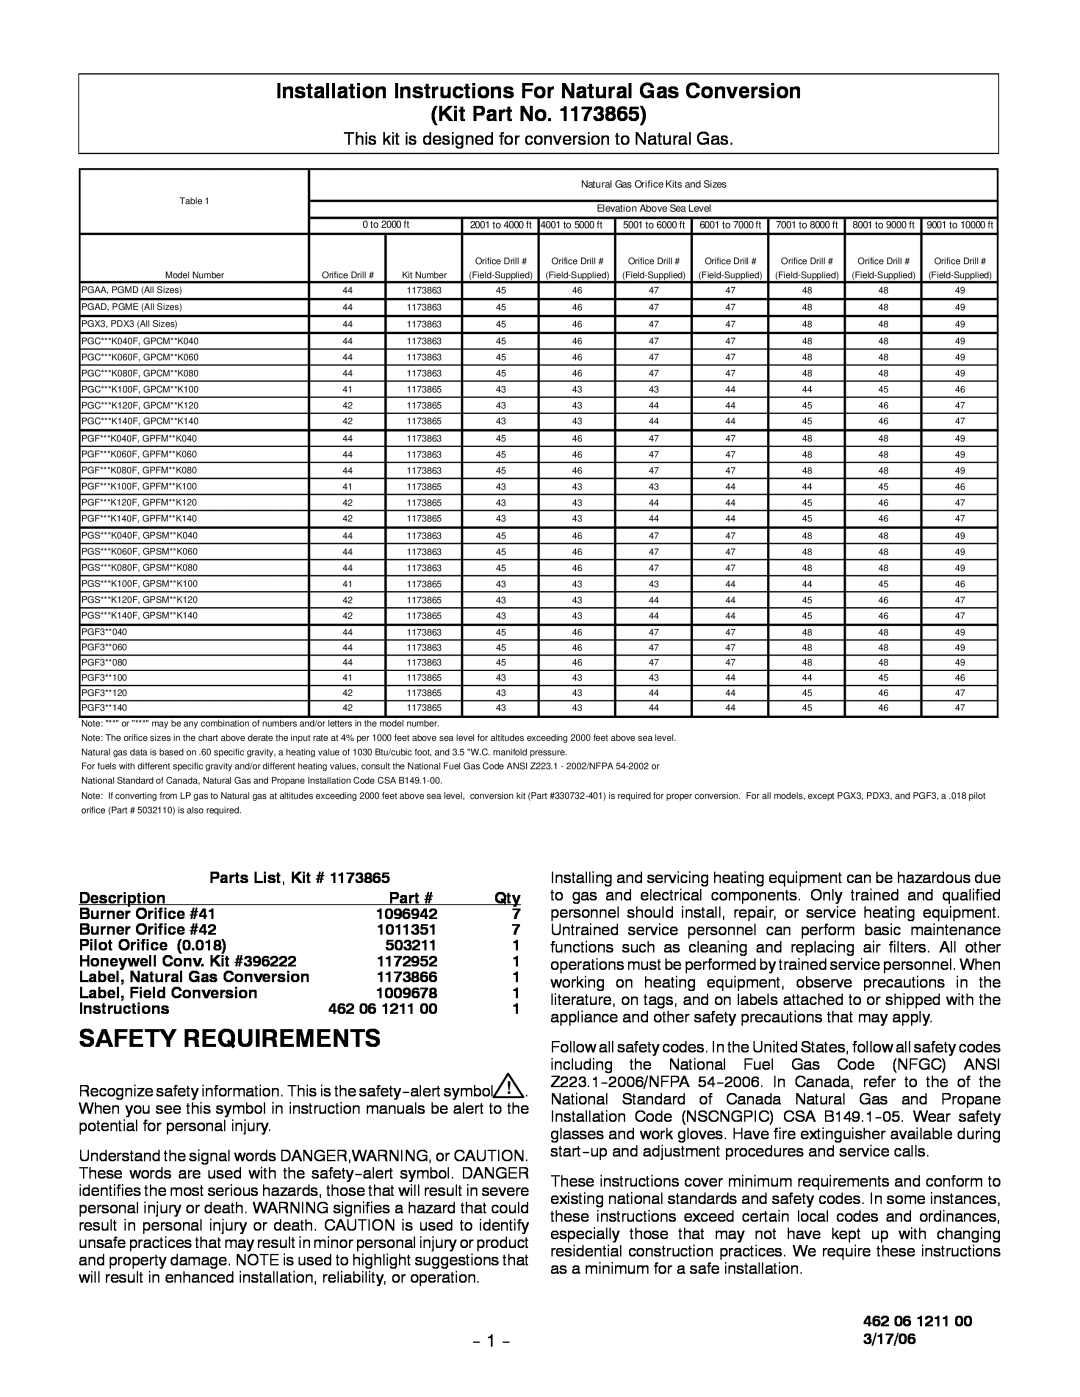 Honeywell PGF3 installation instructions Safety Requirements 